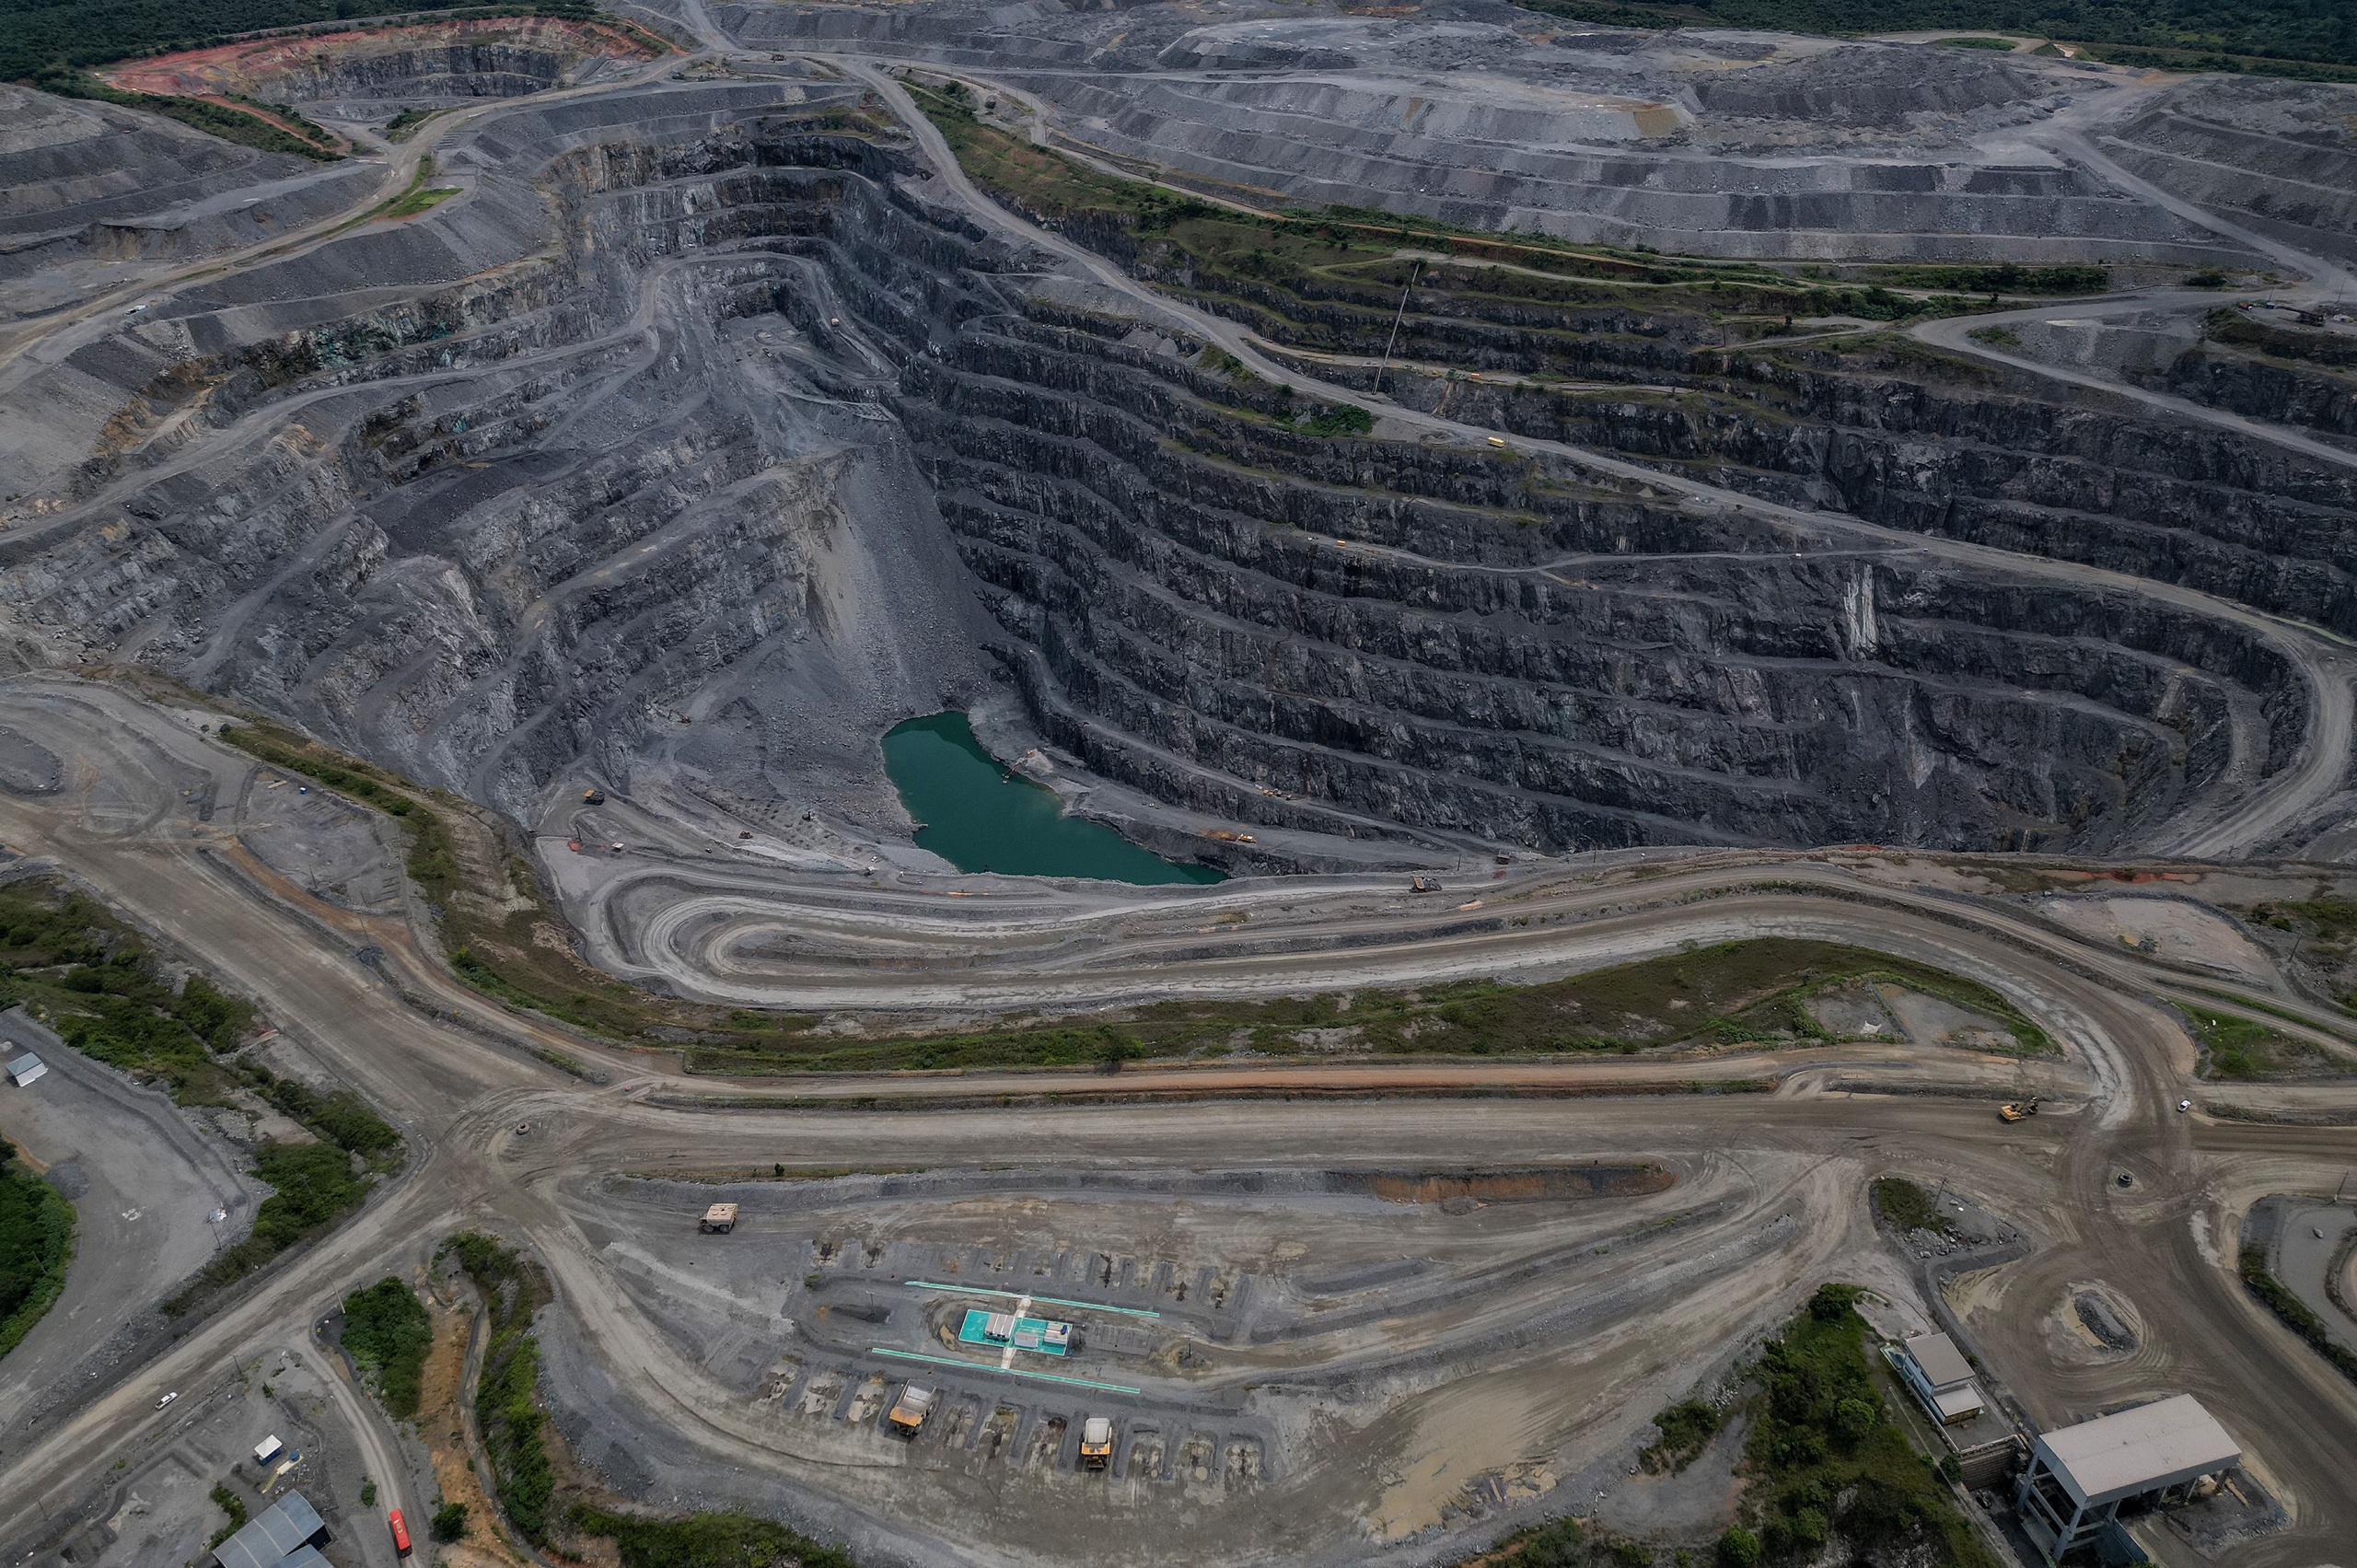 A copper mine.  The copper price is falling, which is bad news for the global economy, according to macro economist Edin Mujagic.  'The copper price moves along with the global economy, and is therefore a good indicator to indicate what is about to happen to the global economy.'